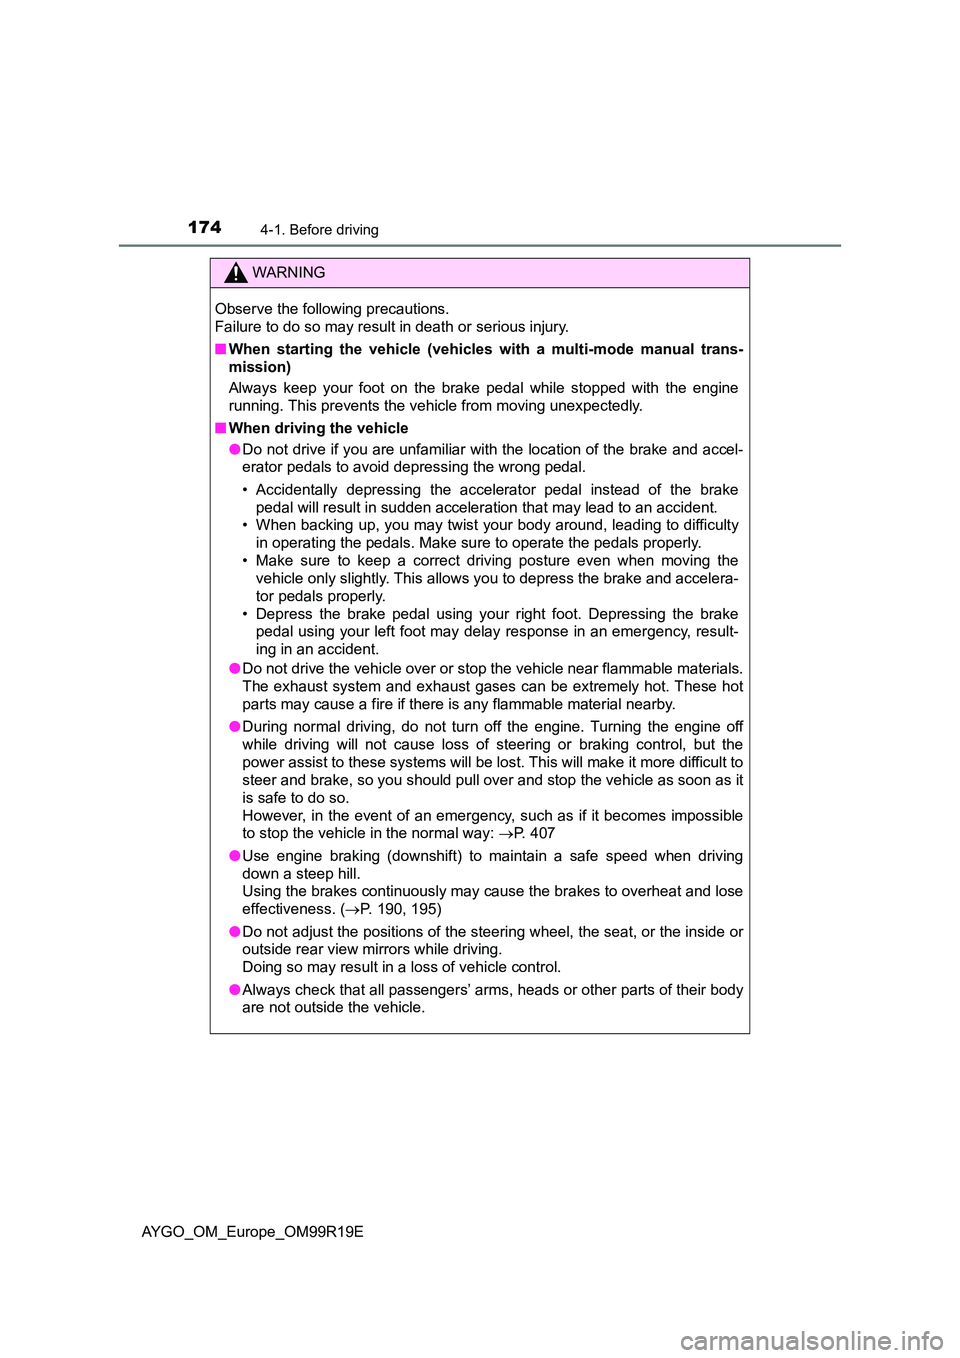 TOYOTA AYGO 2019  Owners Manual (in English) 1744-1. Before driving
AYGO_OM_Europe_OM99R19E
WARNING
Observe the following precautions.  
Failure to do so may result in death or serious injury. 
■ When starting the vehicle (vehicles with a mult